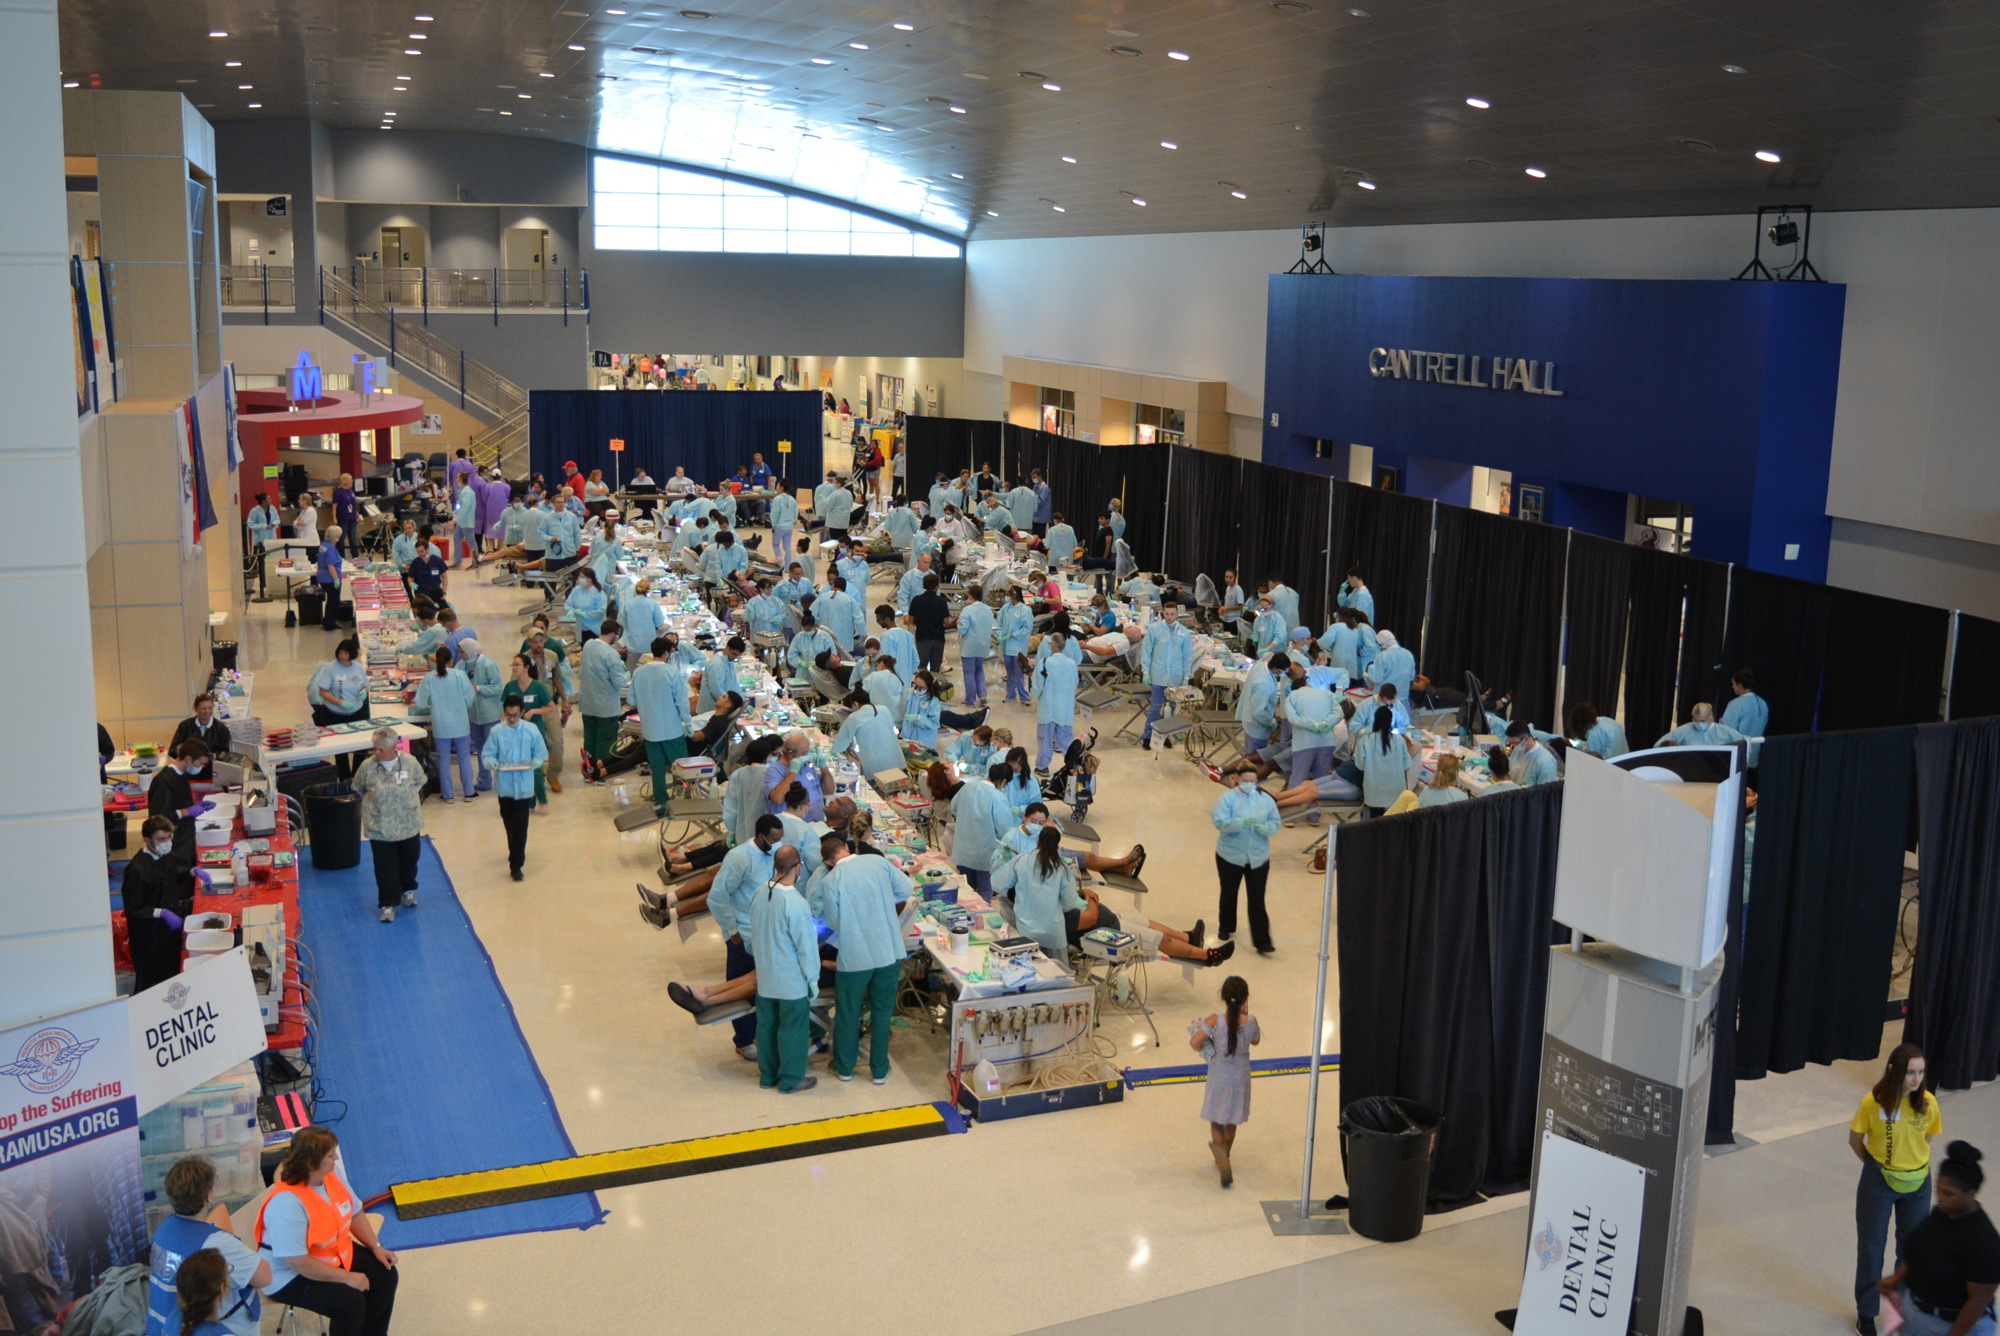 Sixty dental chairs were set up in the main area of Manatee Technical College for the Remote Area Medical event in Bradenton.